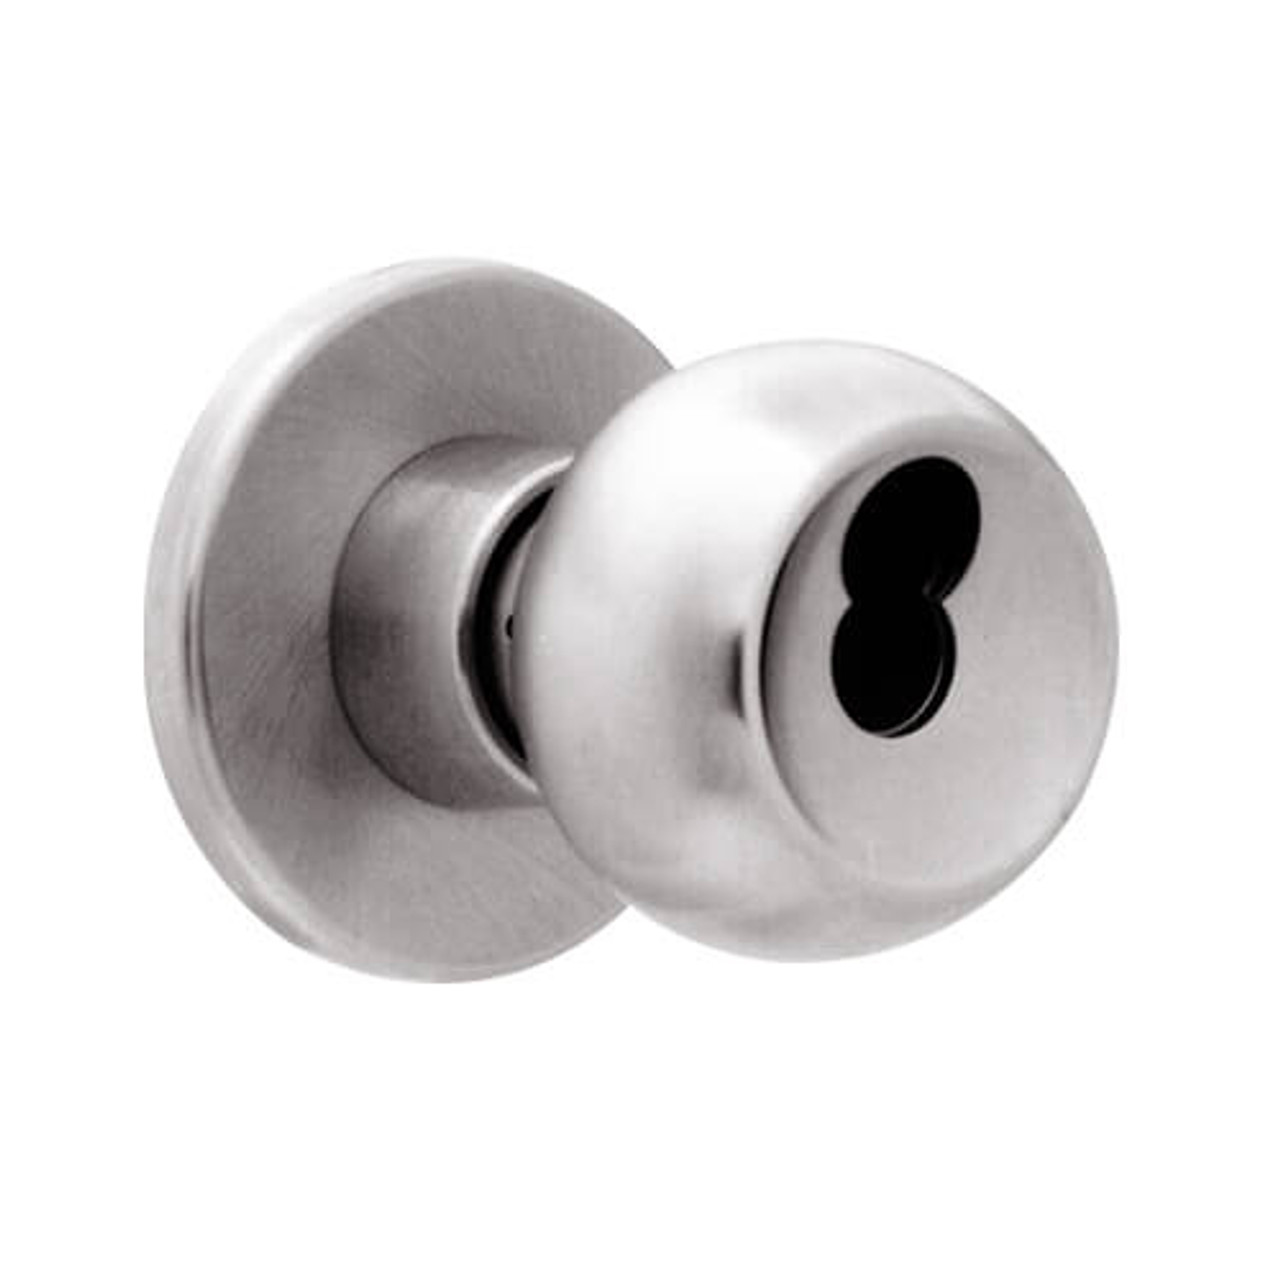 X501BD-TG-630 Falcon X Series Cylindrical Entry Lock with Troy-Gala Knob Style in Satin Stainless Finish